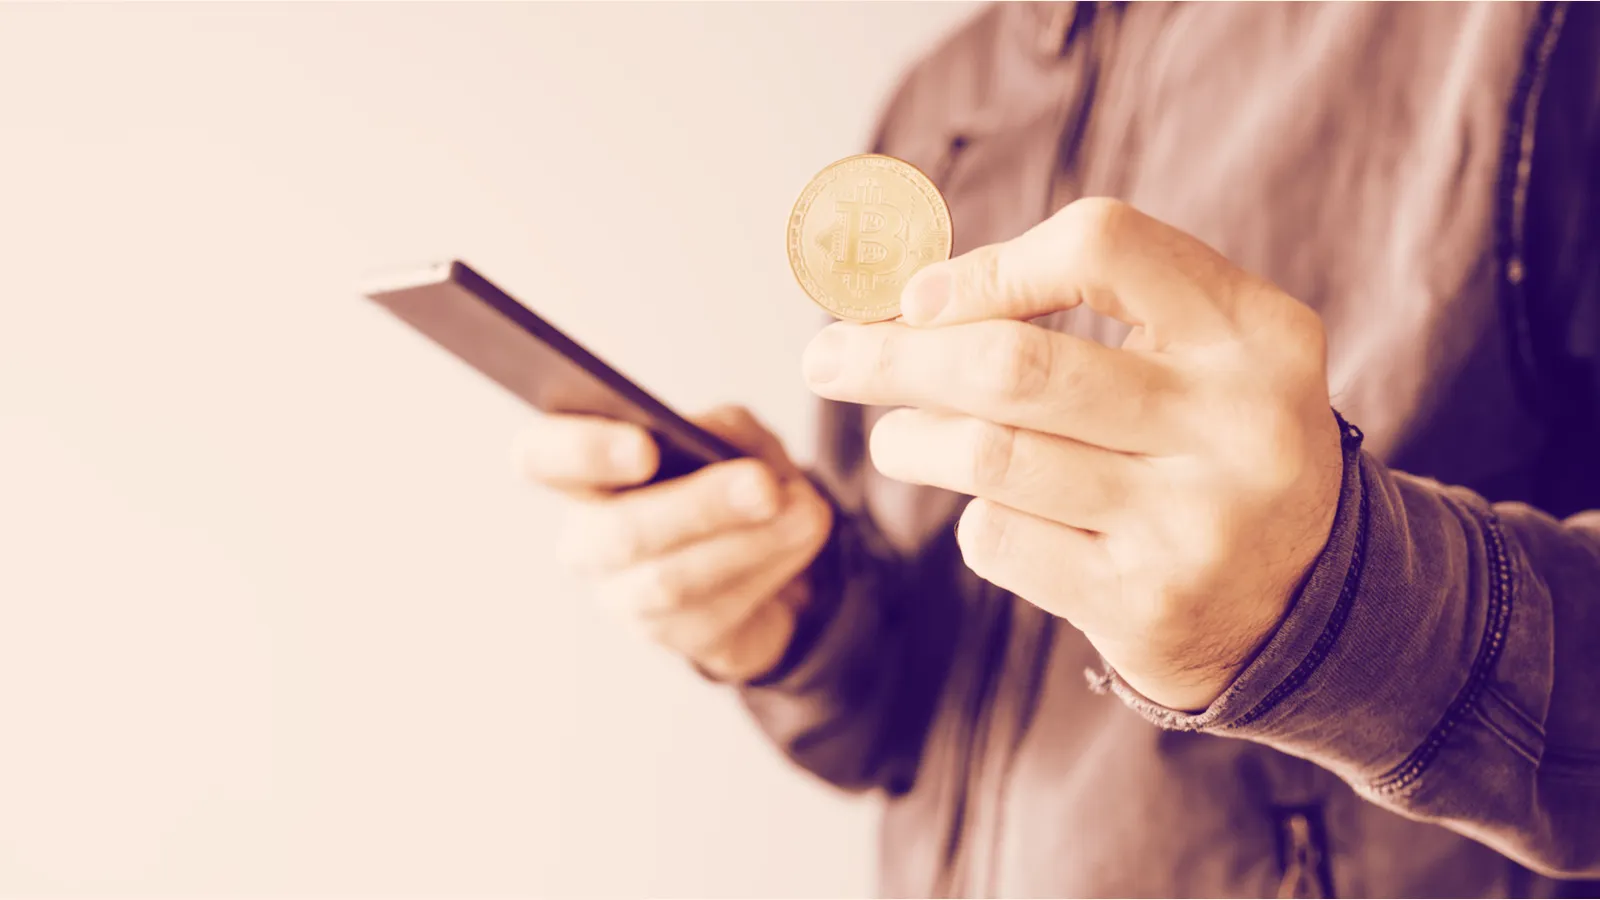 Bitcoin on your phone. Image: Shutterstock